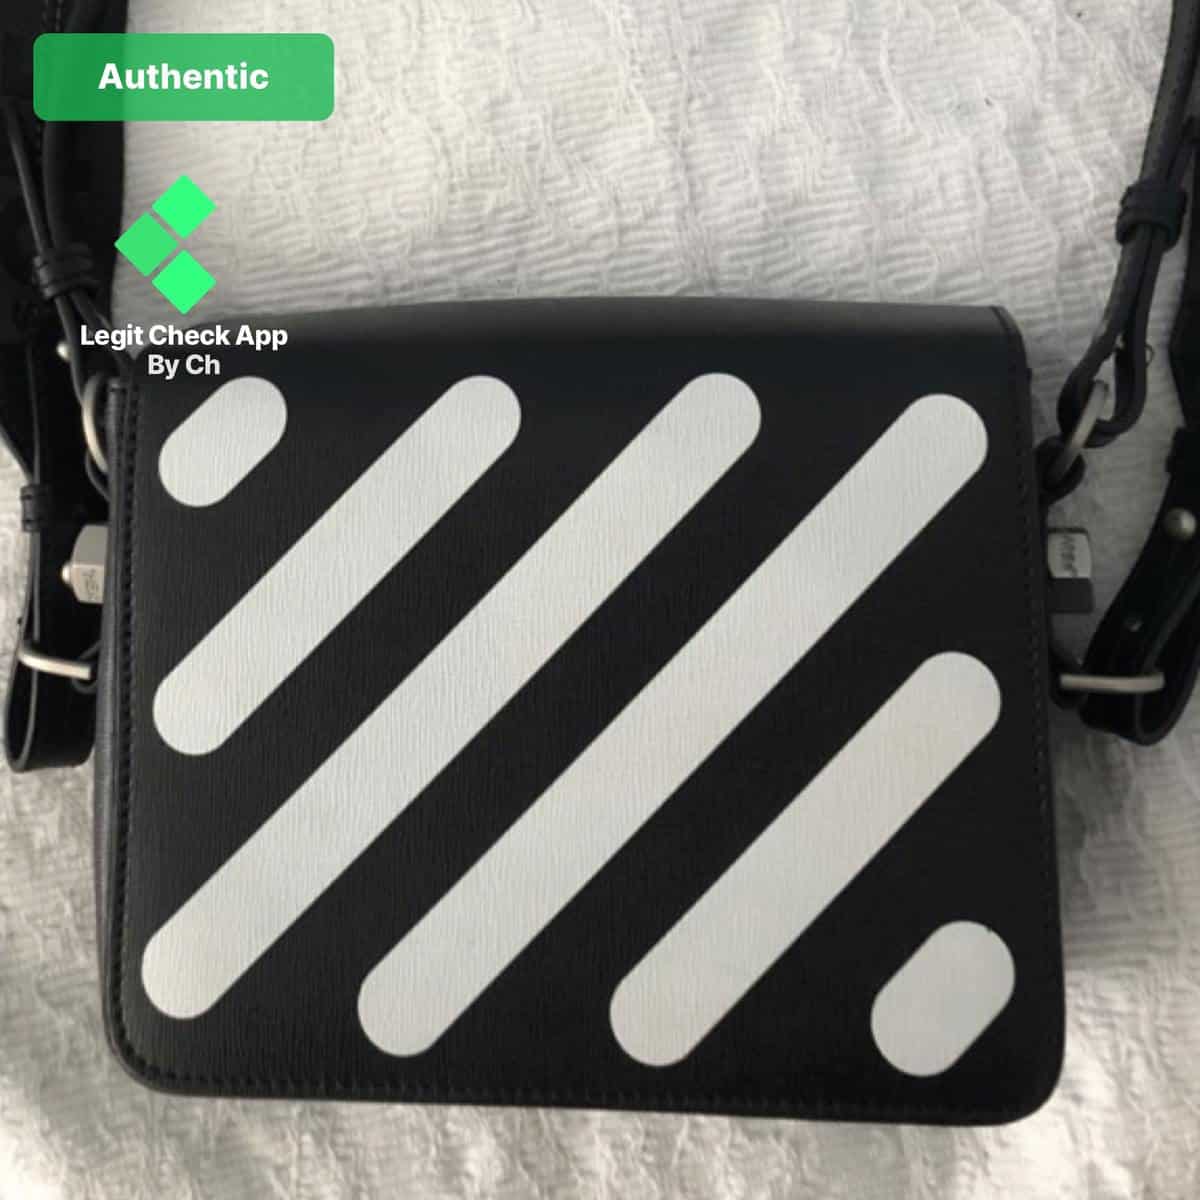 OFF-WHITE Binder Clip Bag Comparison, Review + TRY ON: FULL-SIZE